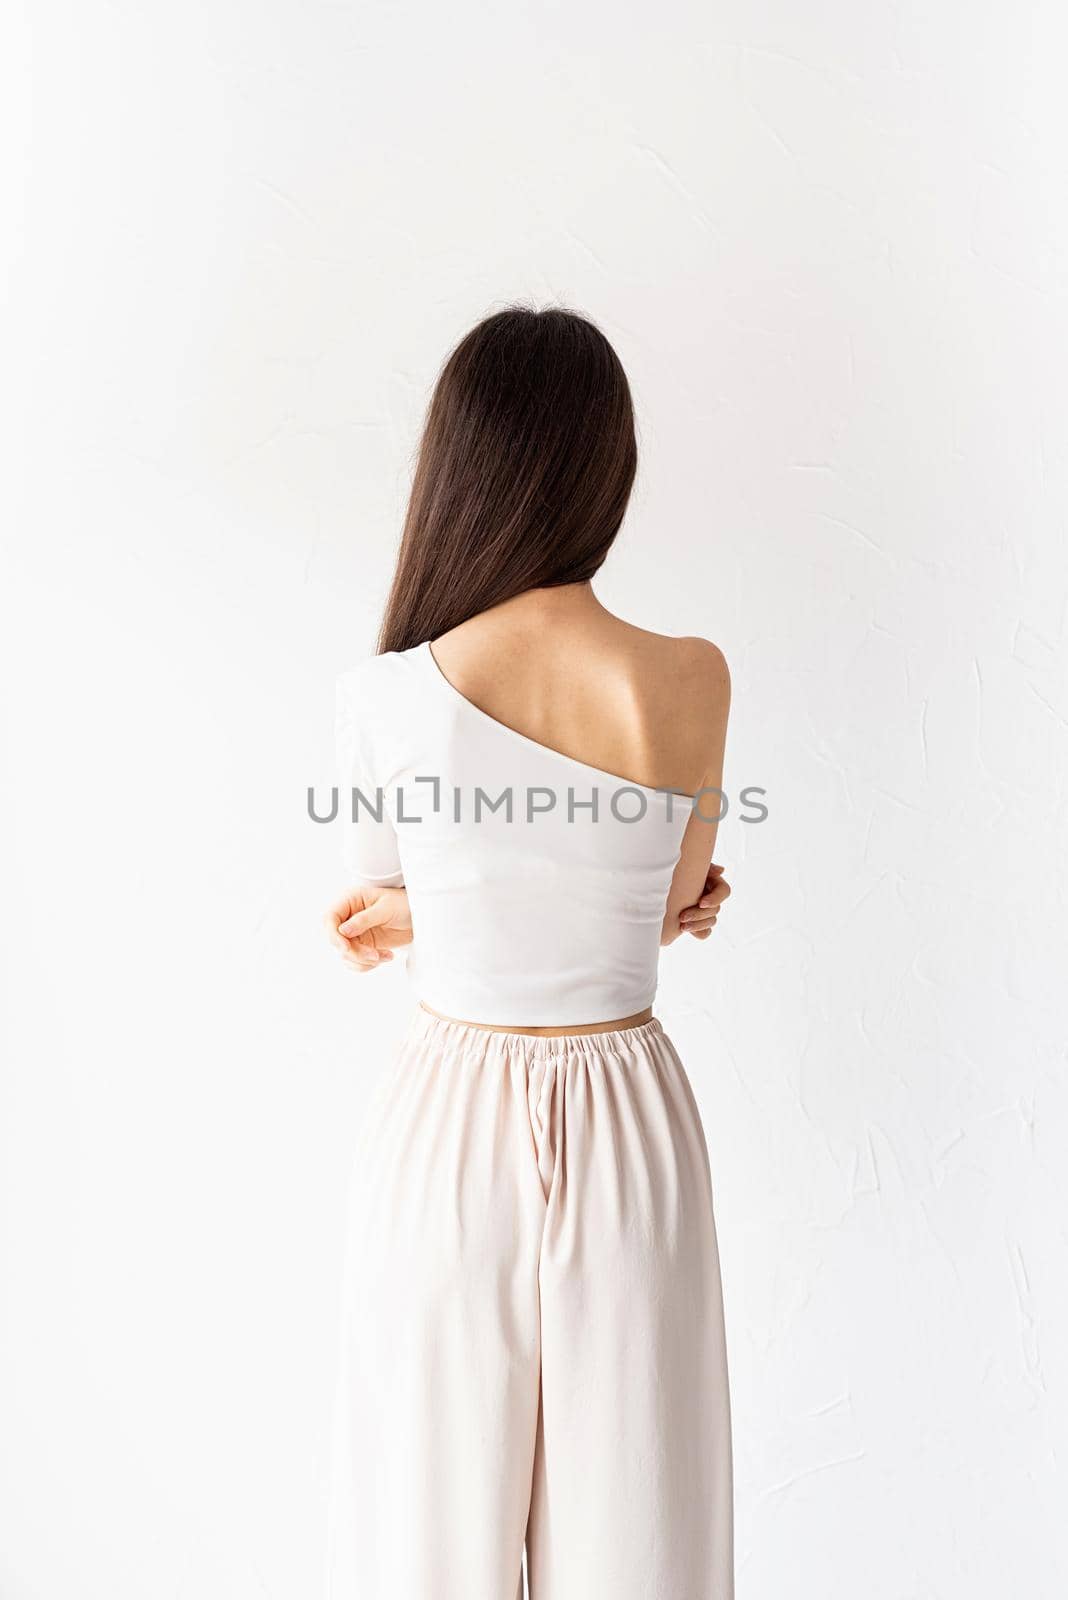 beautiful young woman with long hair in white cozy clothes on white background, view from behind by Desperada